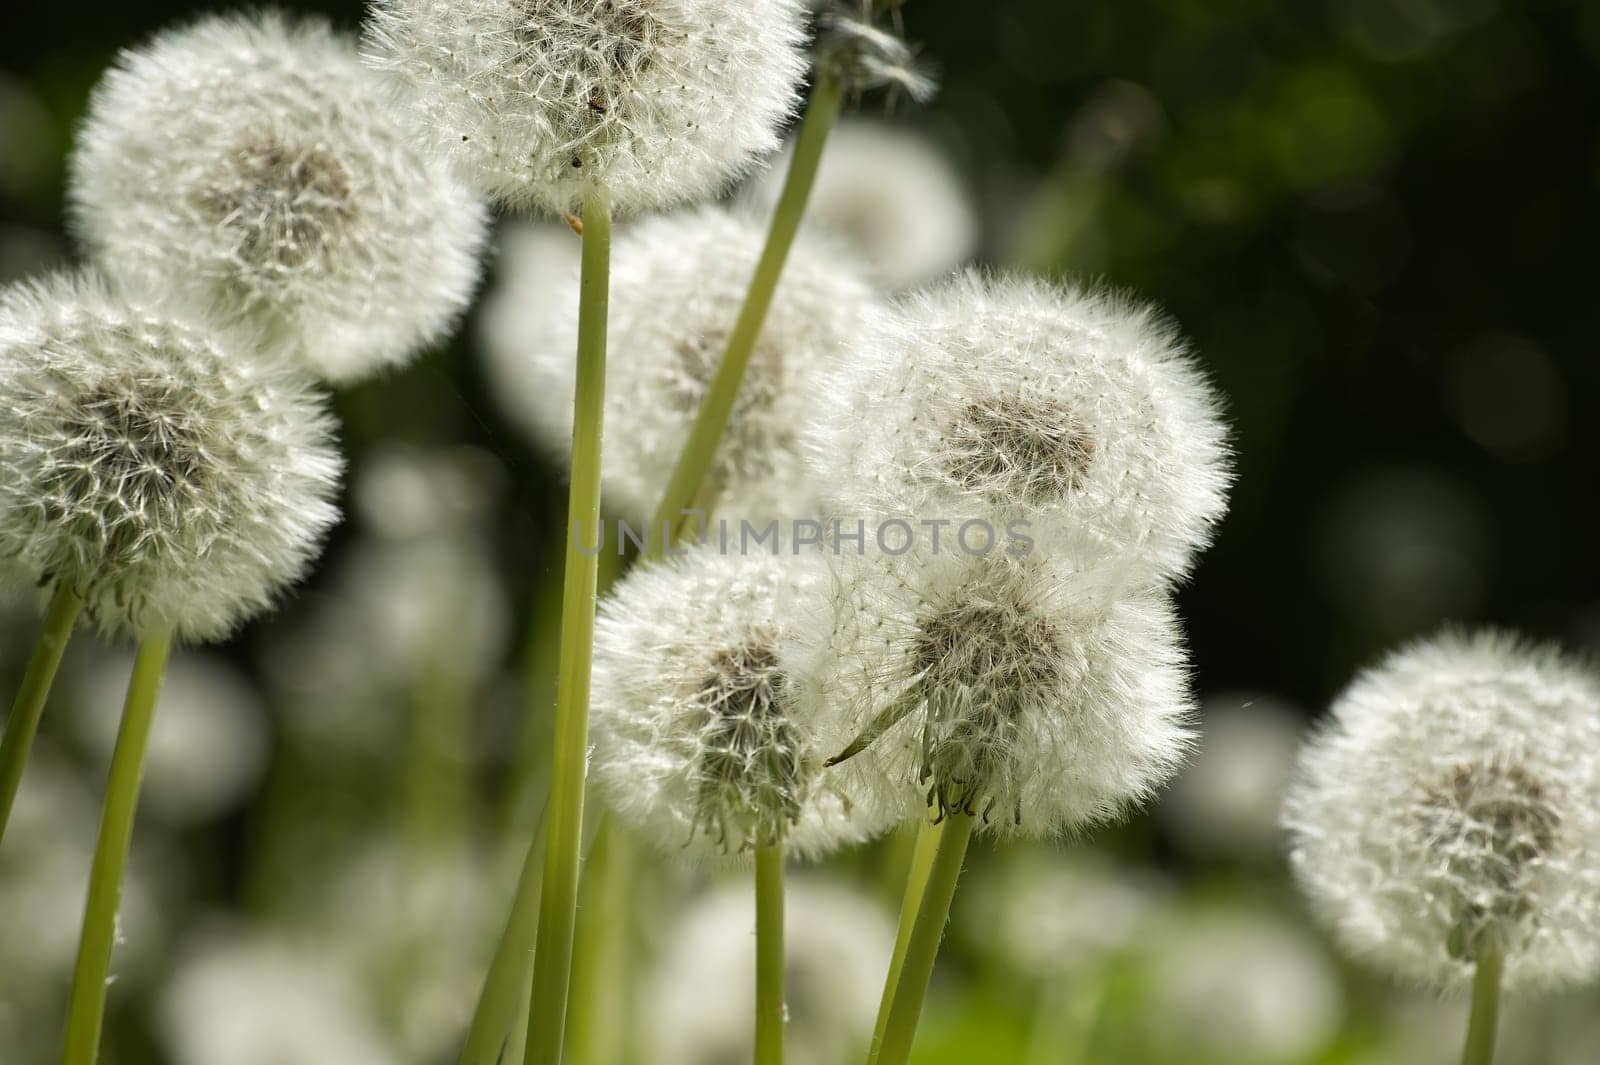 Close-up image of dandelion seed heads in a green field, showcasing the beauty of nature during springtime.